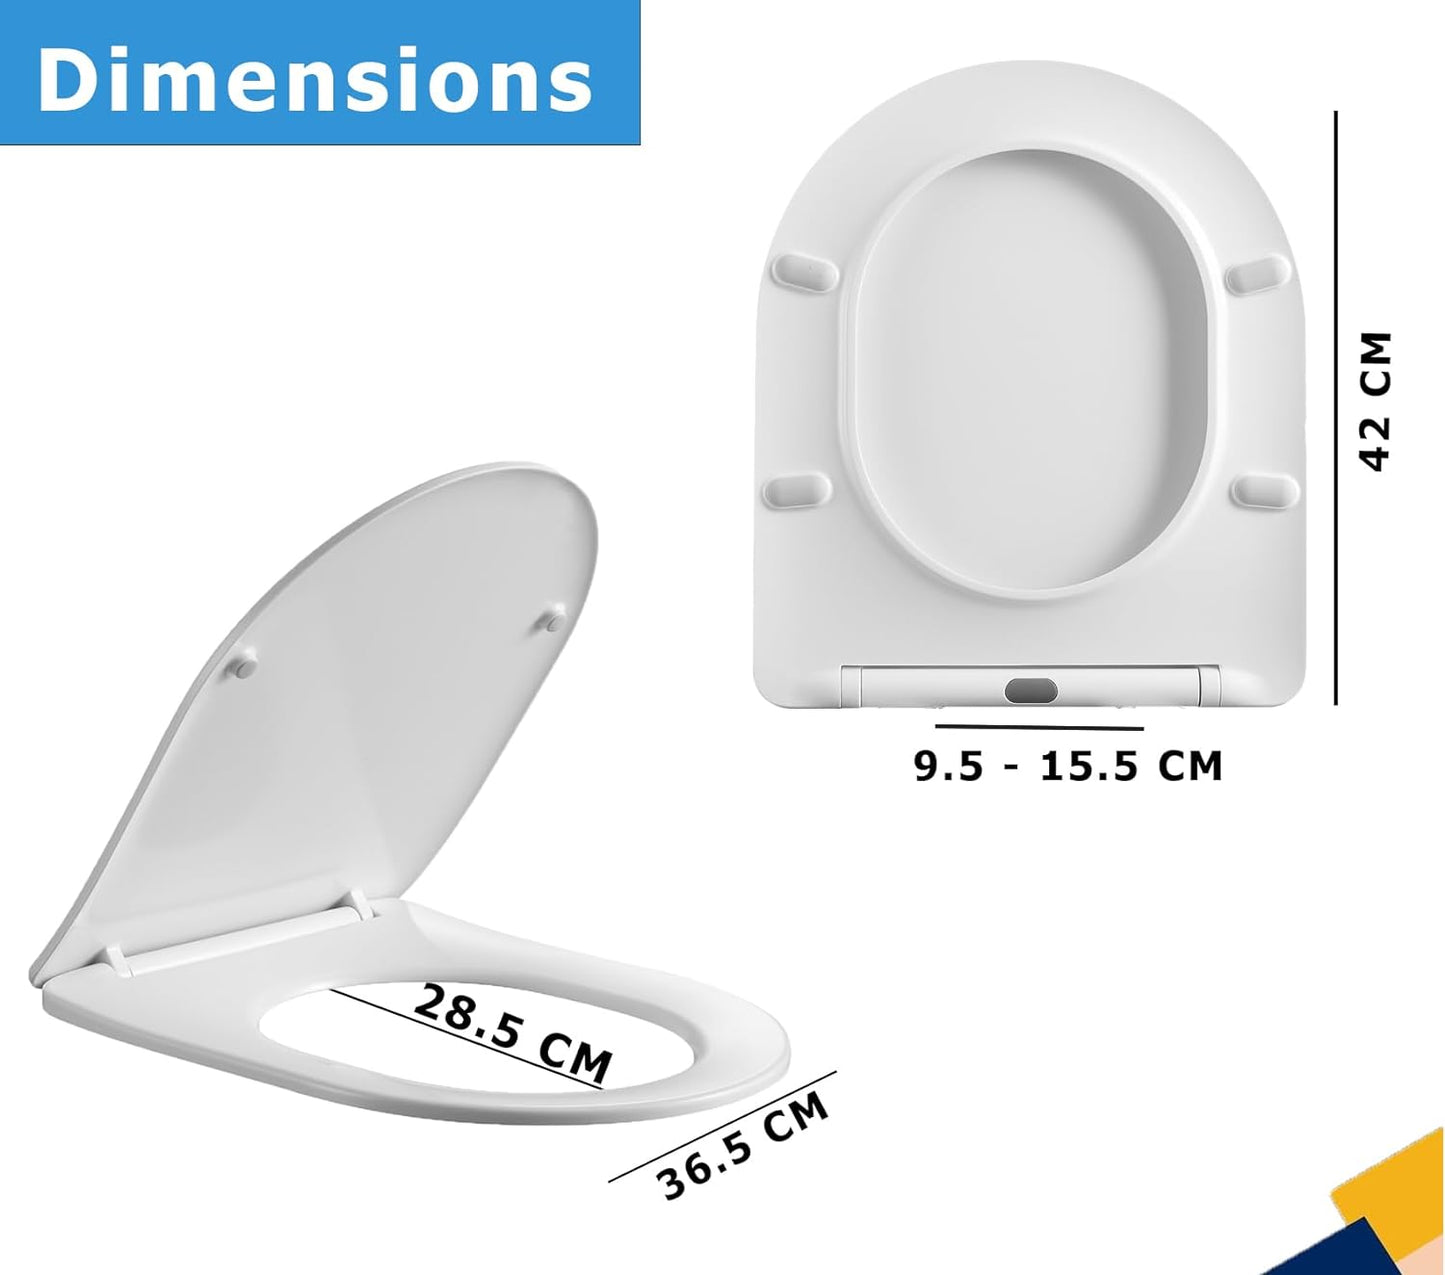 Soft Close D-Shape White Toilet Seat, One Button Quick Release for Cleaning, Durable Urea Formaldehyde Material